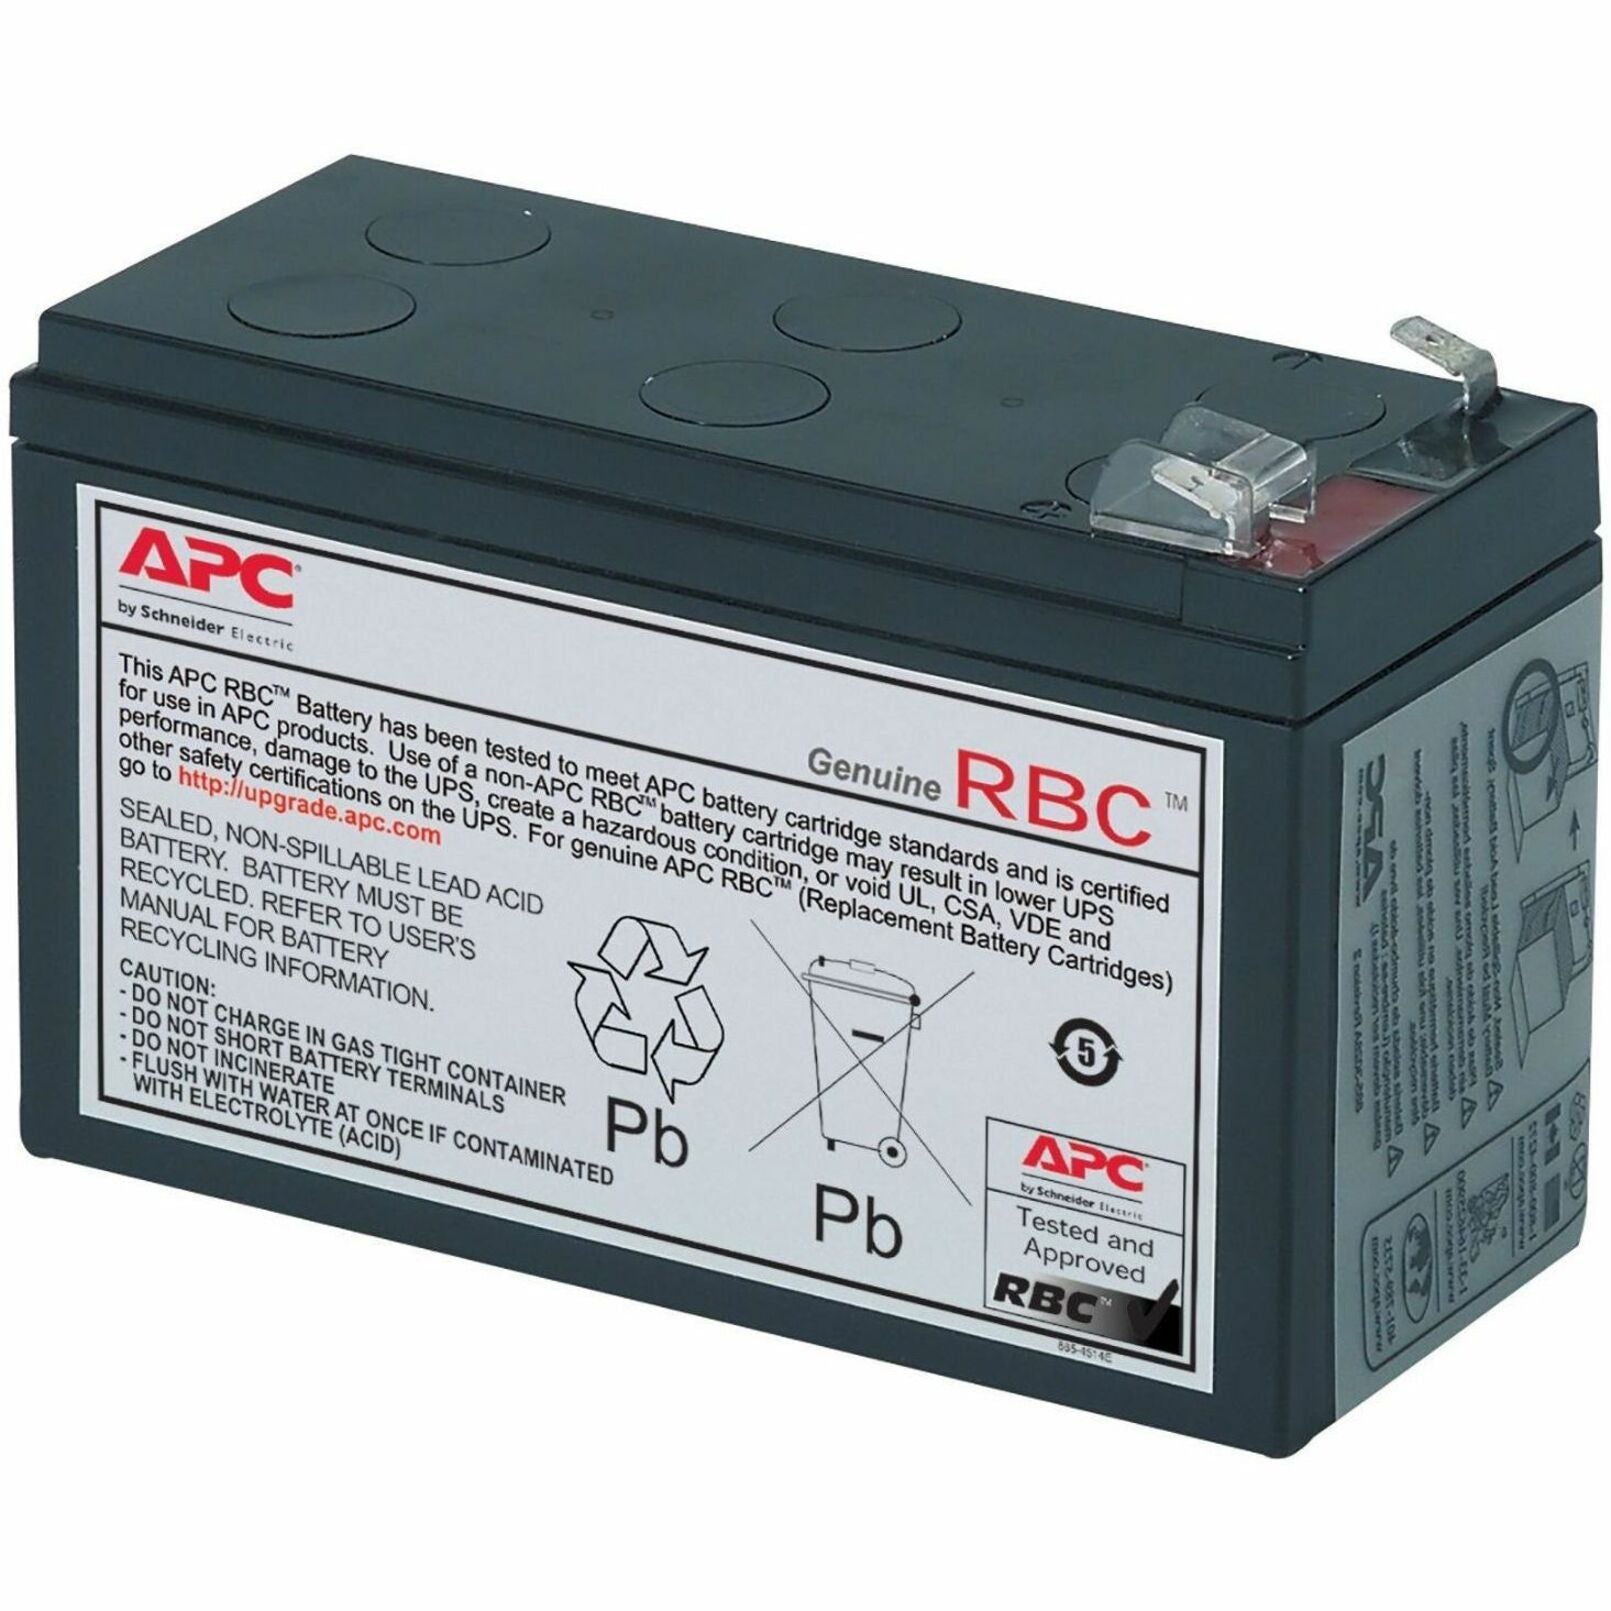 APC RBC2 Replacement Battery Cartridge #2, 2 Year Warranty, 7 Amp-hour Capacity